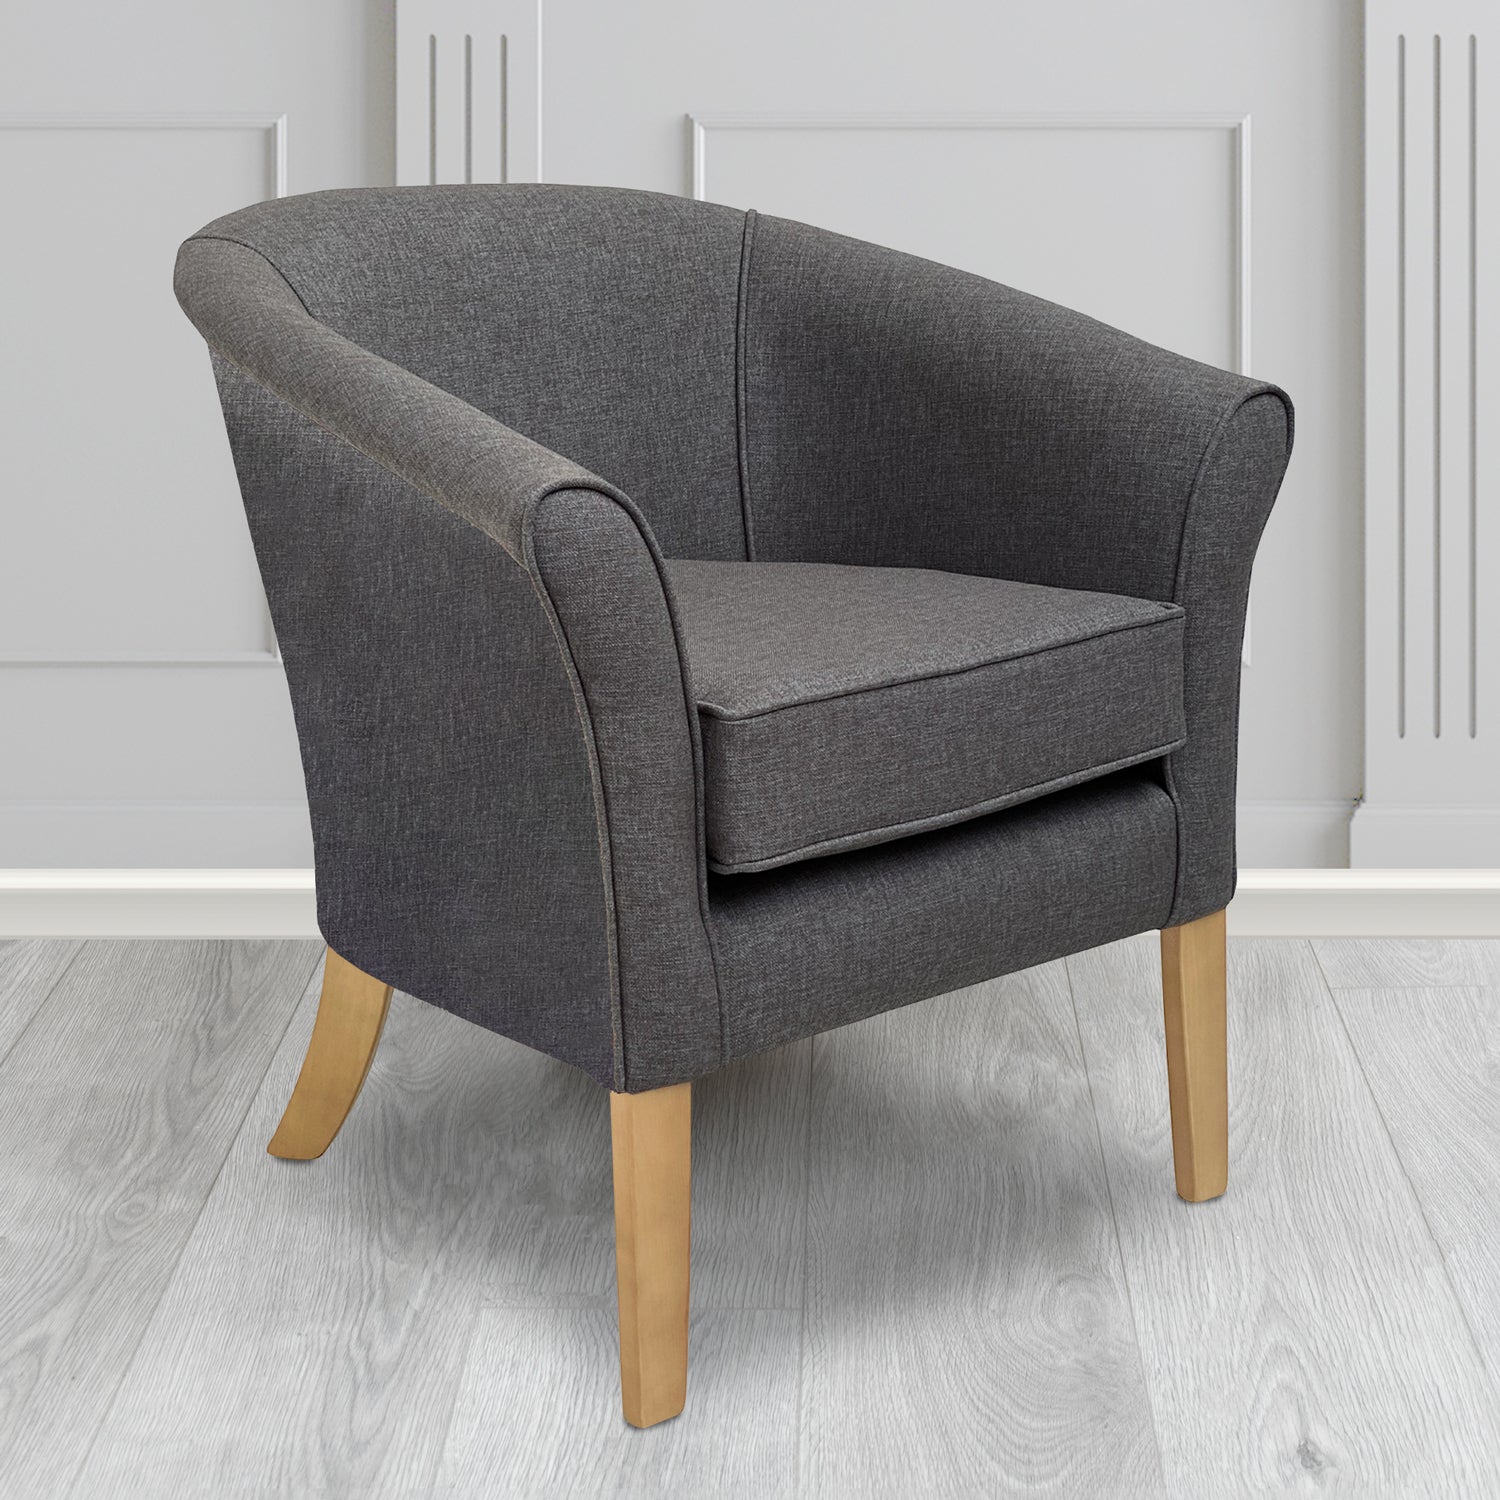 Aspen Tub Chair in Marna 954 Graphite Crib 5 Fabric - Antimicrobial, Stain Resistant & Waterproof - The Tub Chair Shop